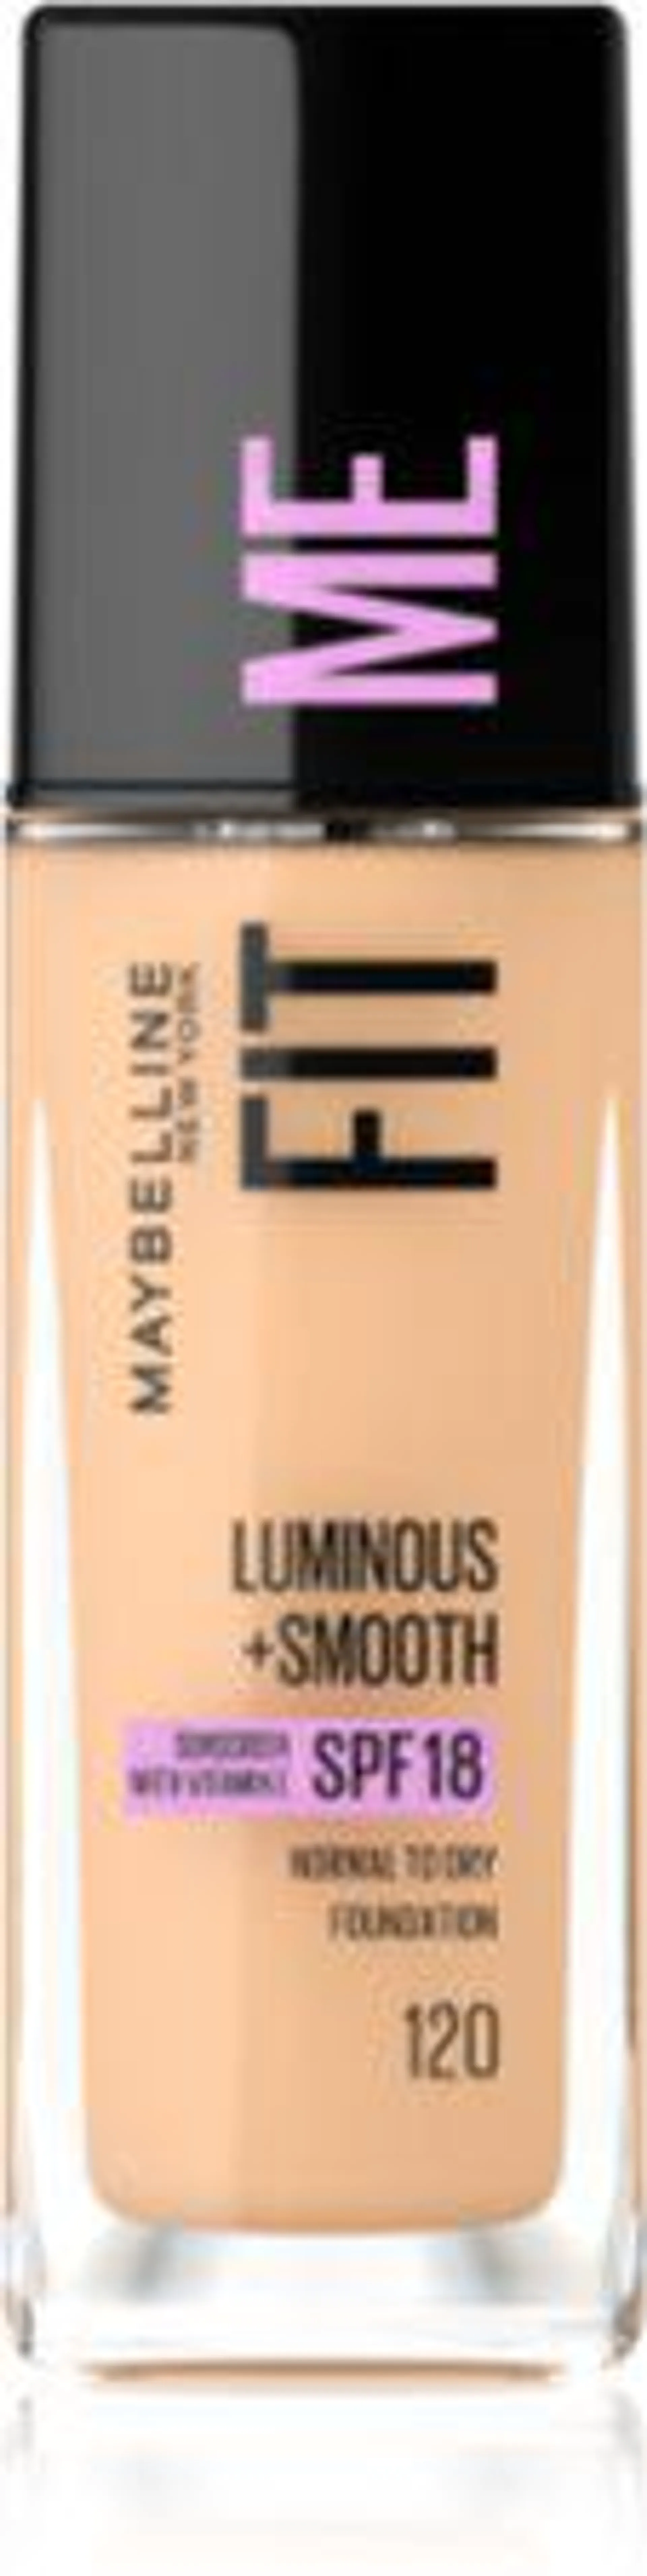 Liquid Foundation to brighten and smooth the skin